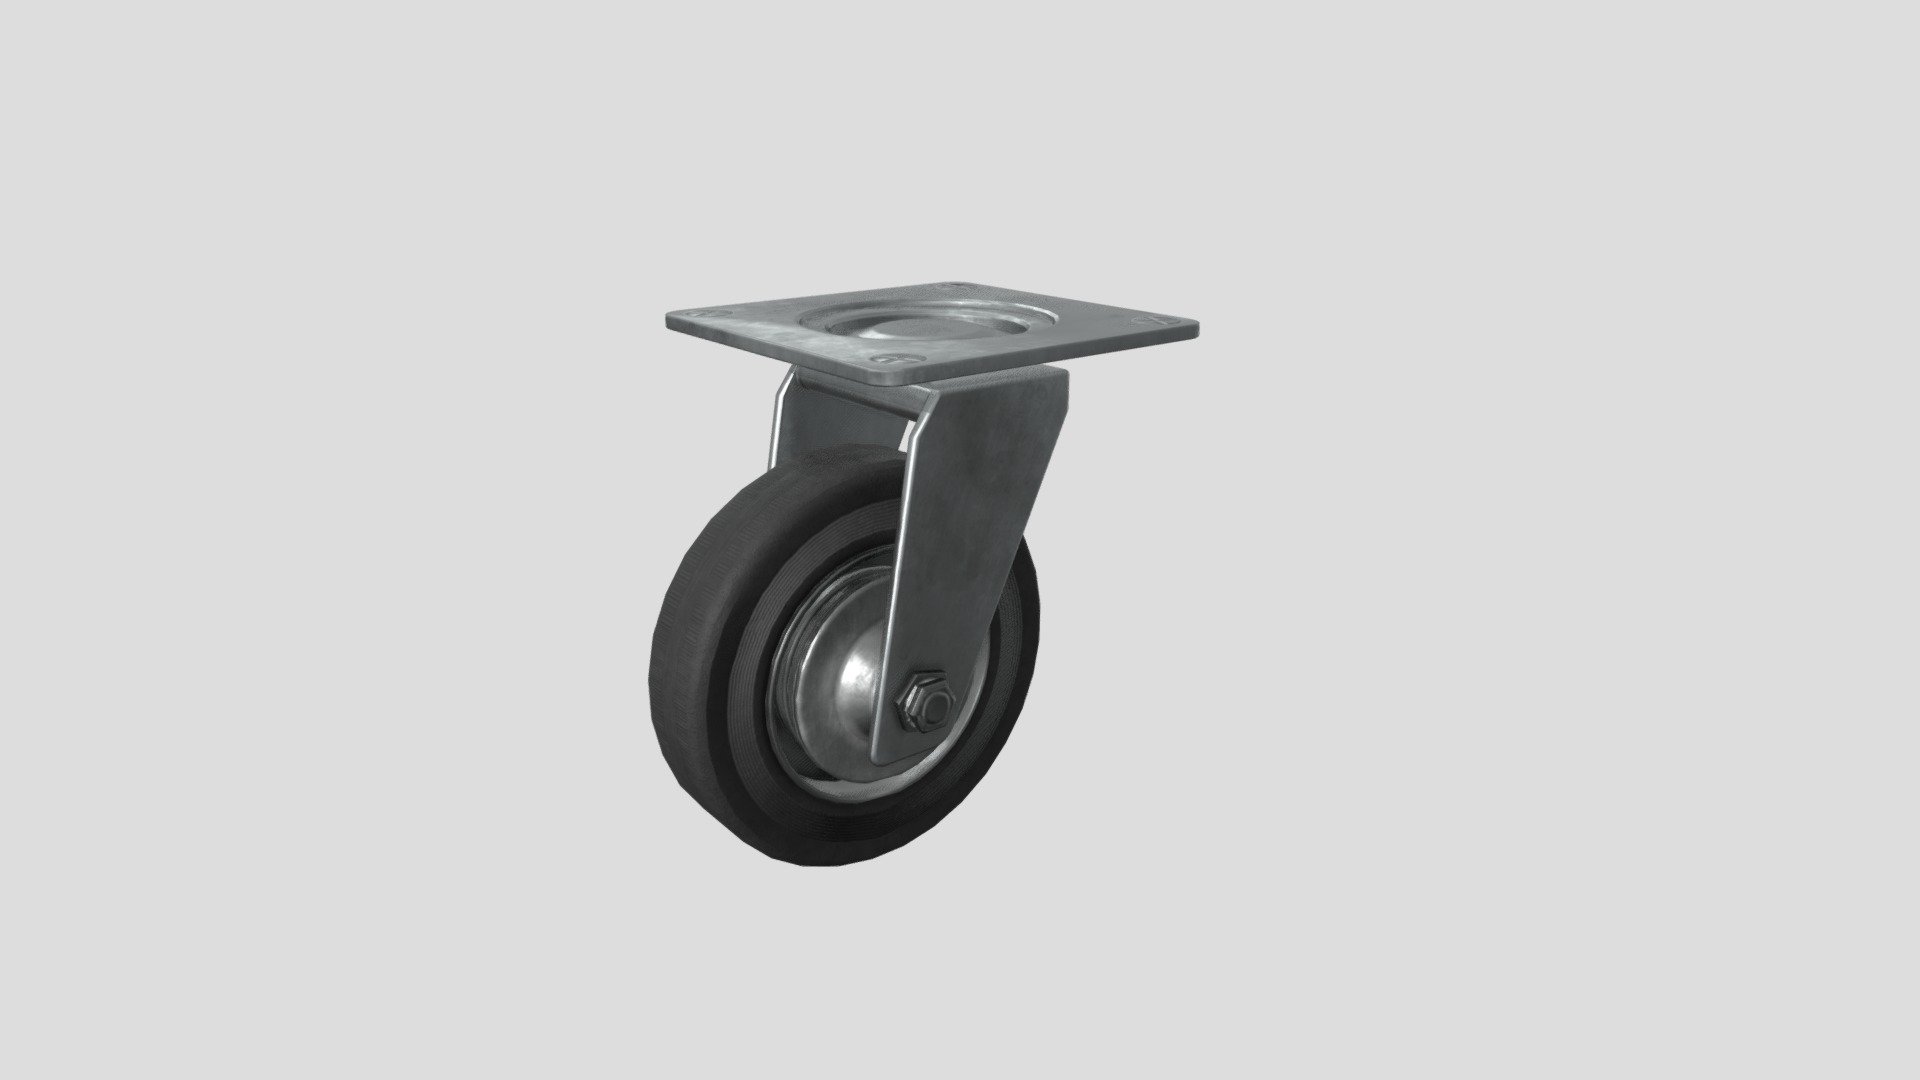 My hard-surface study featuring trolley wheel. Modelled Hp and LW in Blender, baked in Marmoset Toolbag and textured in Substance Painter.
Made for my portfolio so polycount is a bit high 3d model